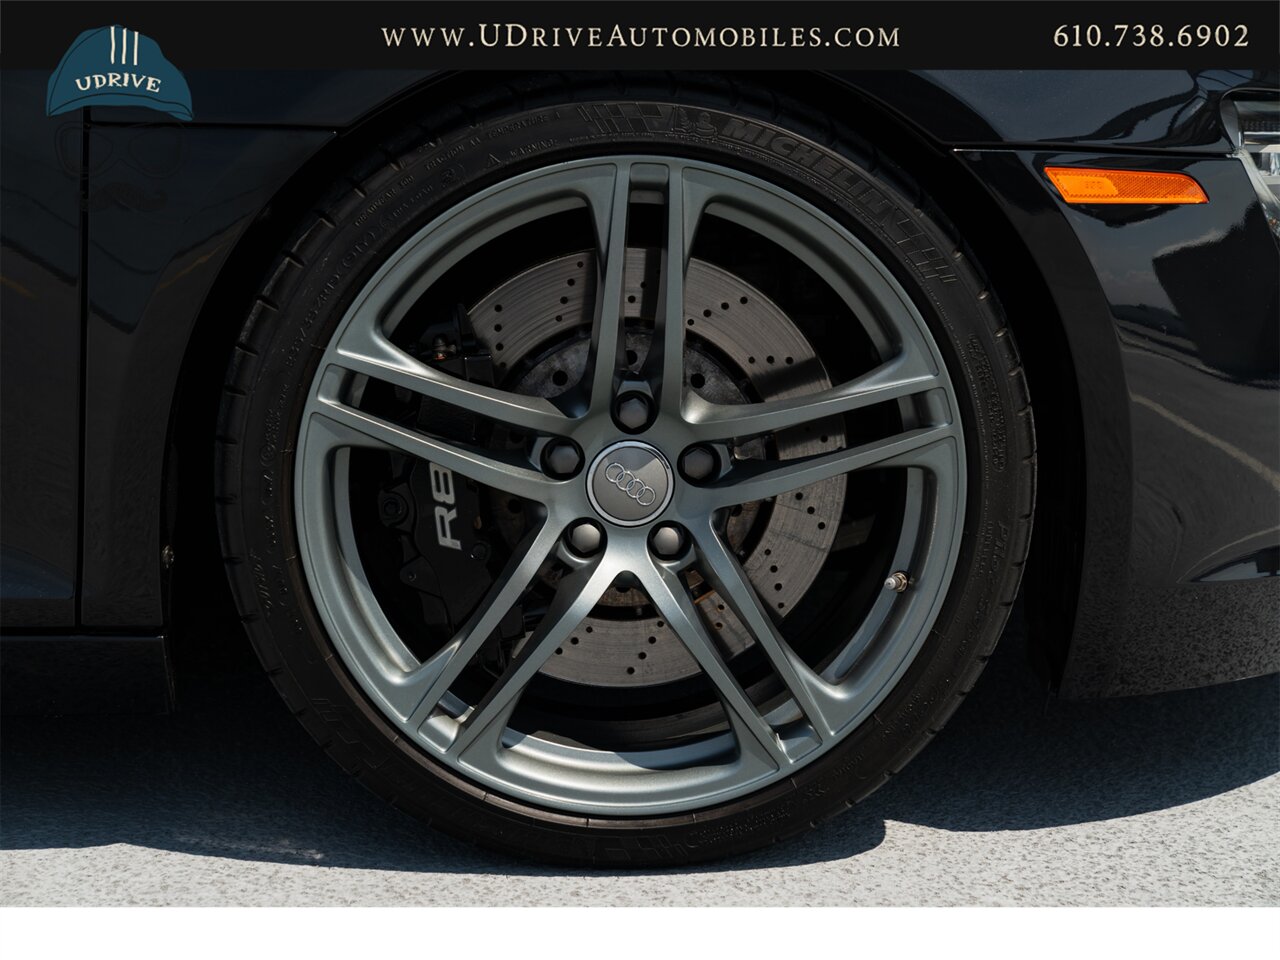 2012 Audi R8 4.2 Quattro  6 Speed Manual 1 Owner Service History - Photo 55 - West Chester, PA 19382